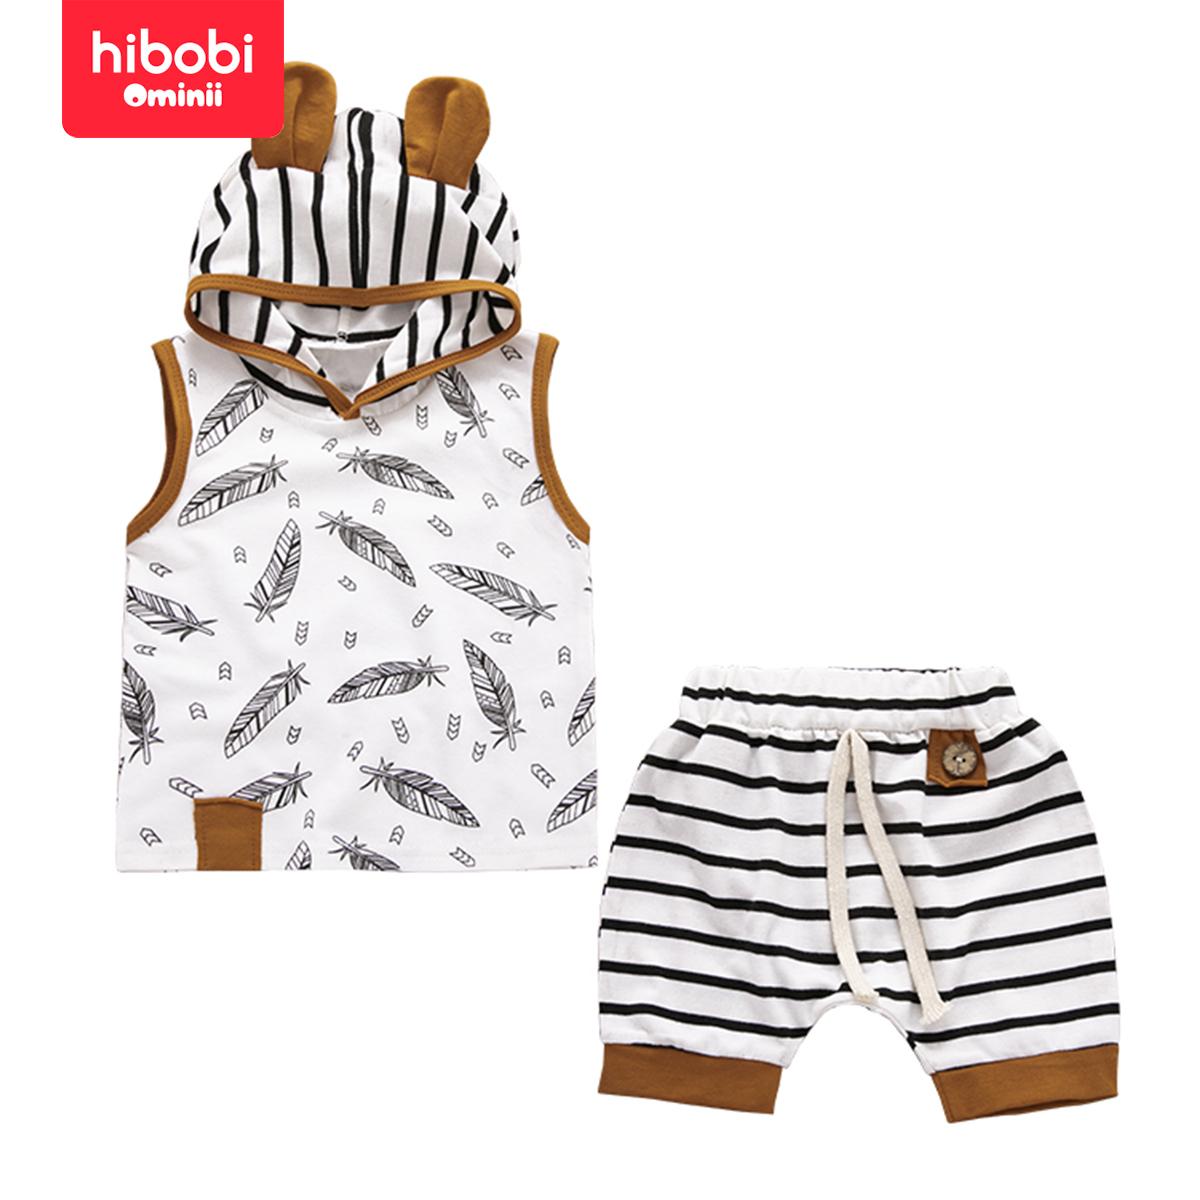 hibobi New Children's Clothing Summer Hot Sale Striped Animal Pattern Print Casual Pullover Shorts Two-Piece Set